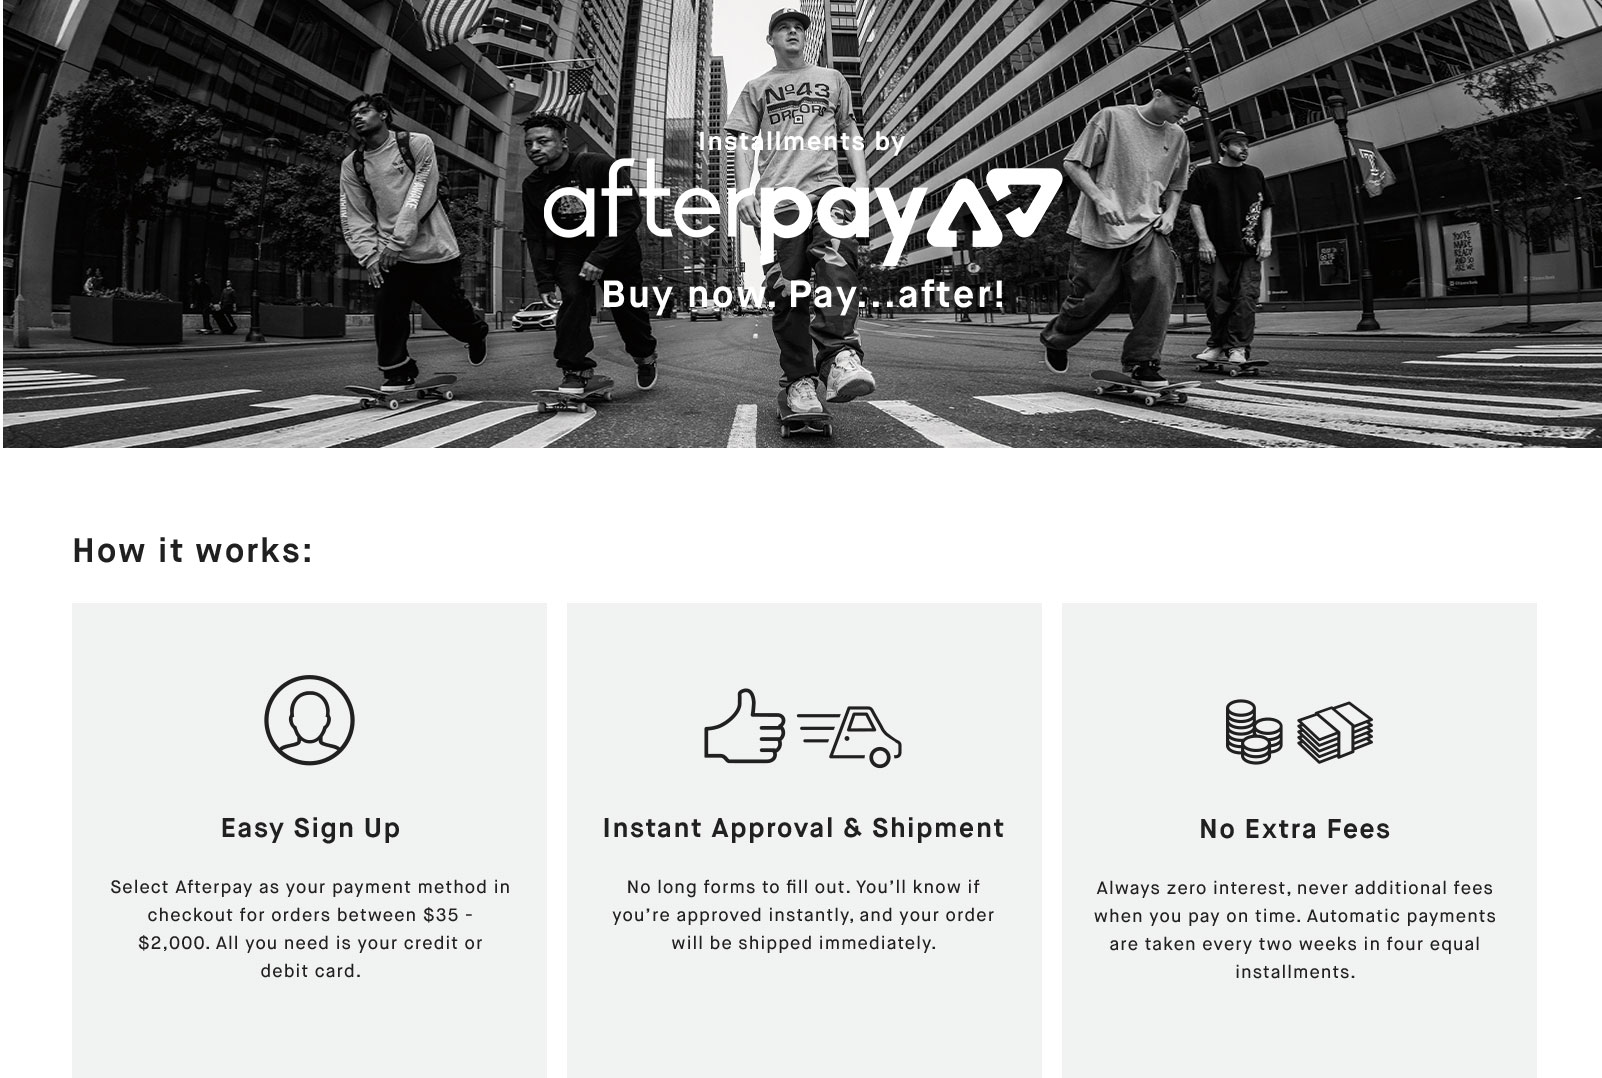 Afterpay Available, Buy Now Pay Later